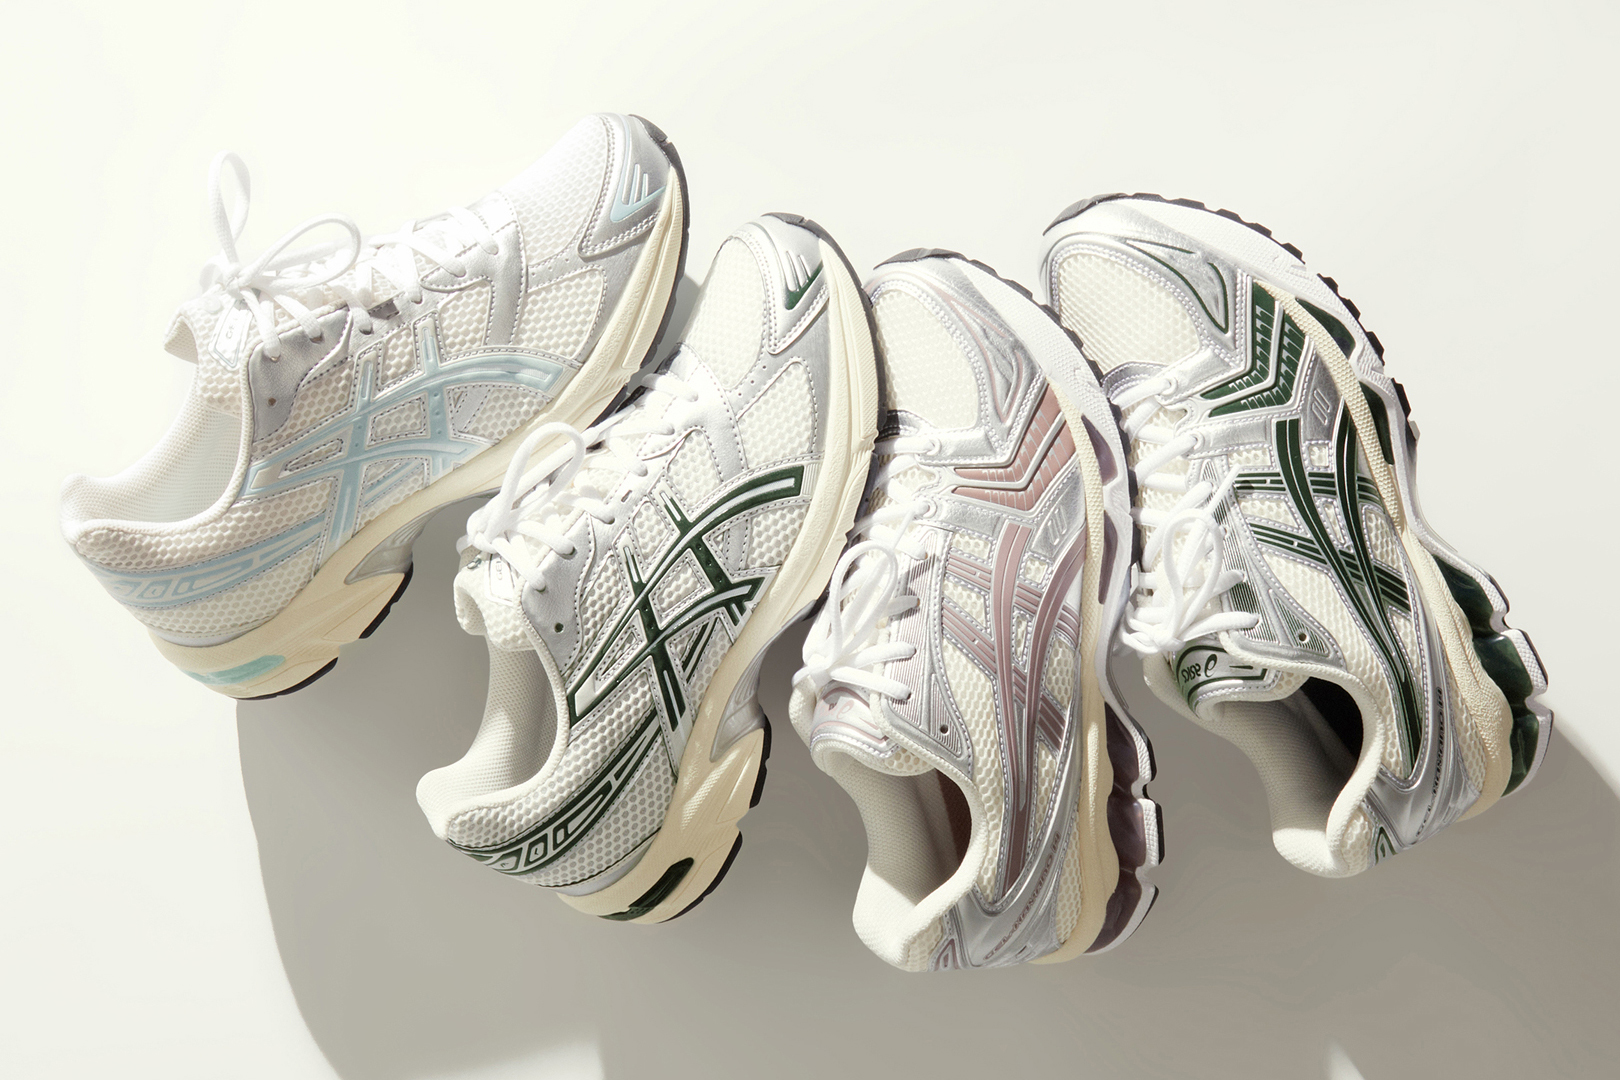 The KITH x ASICS “Vintage Tech 2023” Pack Is Filled With Summer-Ready Offerings